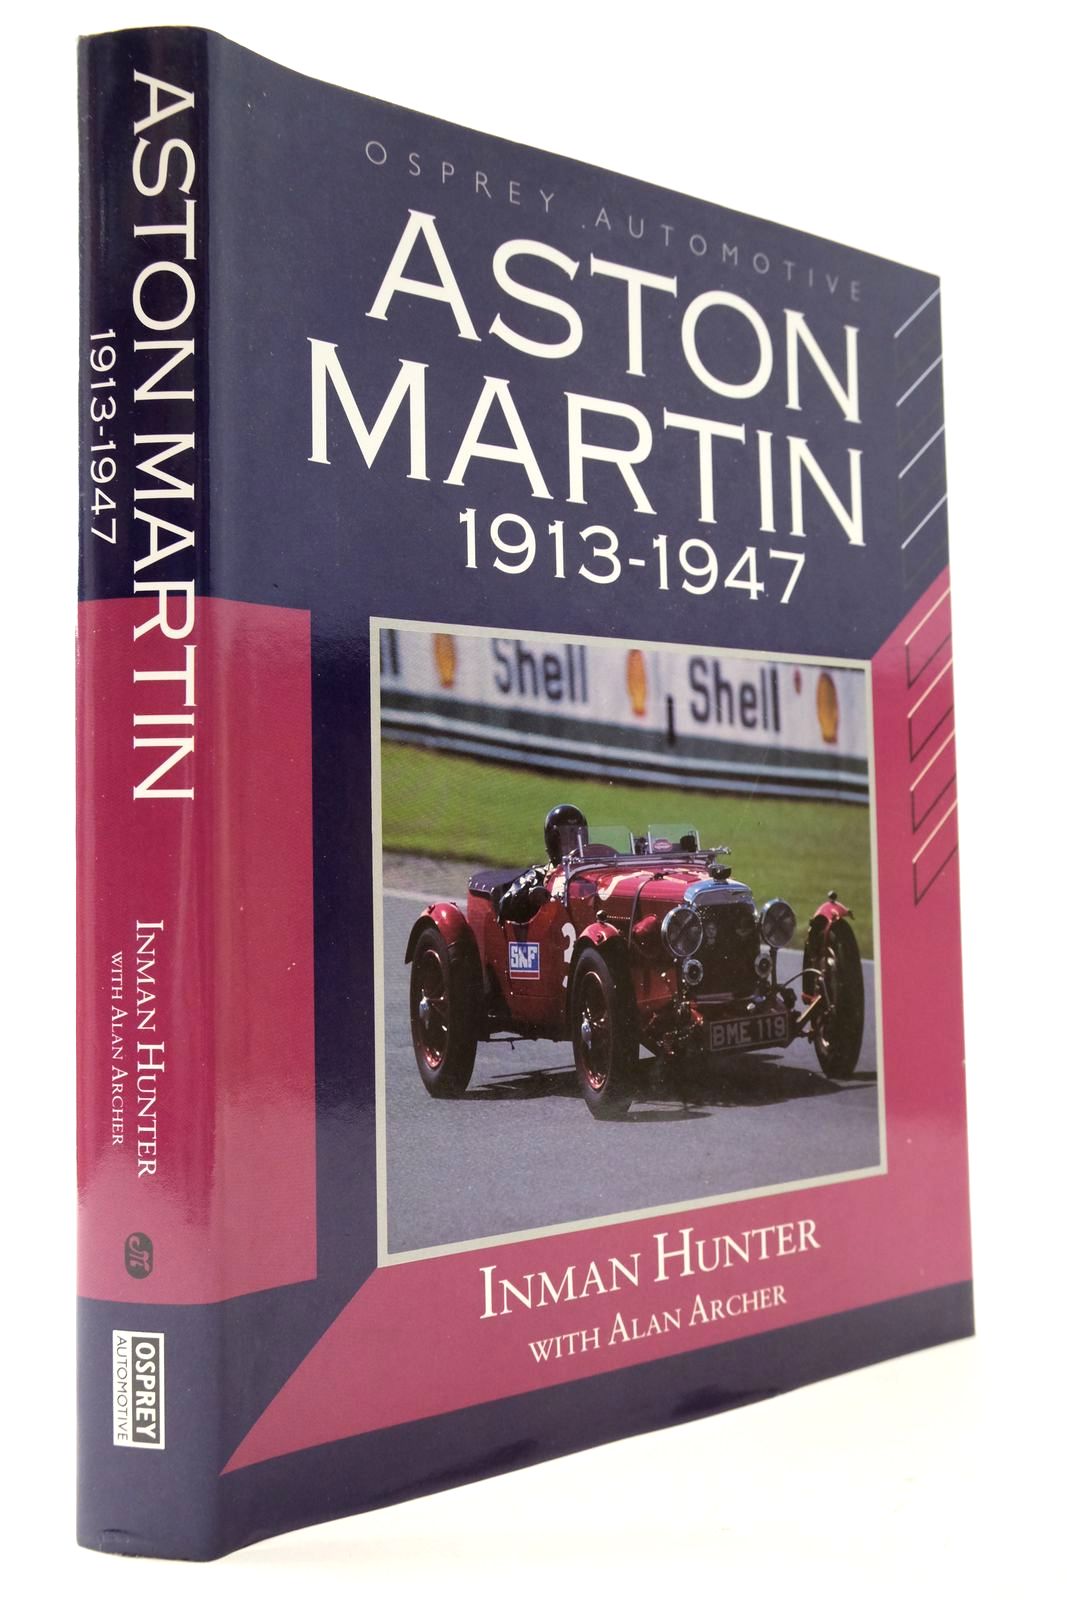 Photo of ASTON MARTIN 1913-1947 written by Hunter, Inman Archer, Alan published by Osprey Automotive (STOCK CODE: 2132823)  for sale by Stella & Rose's Books